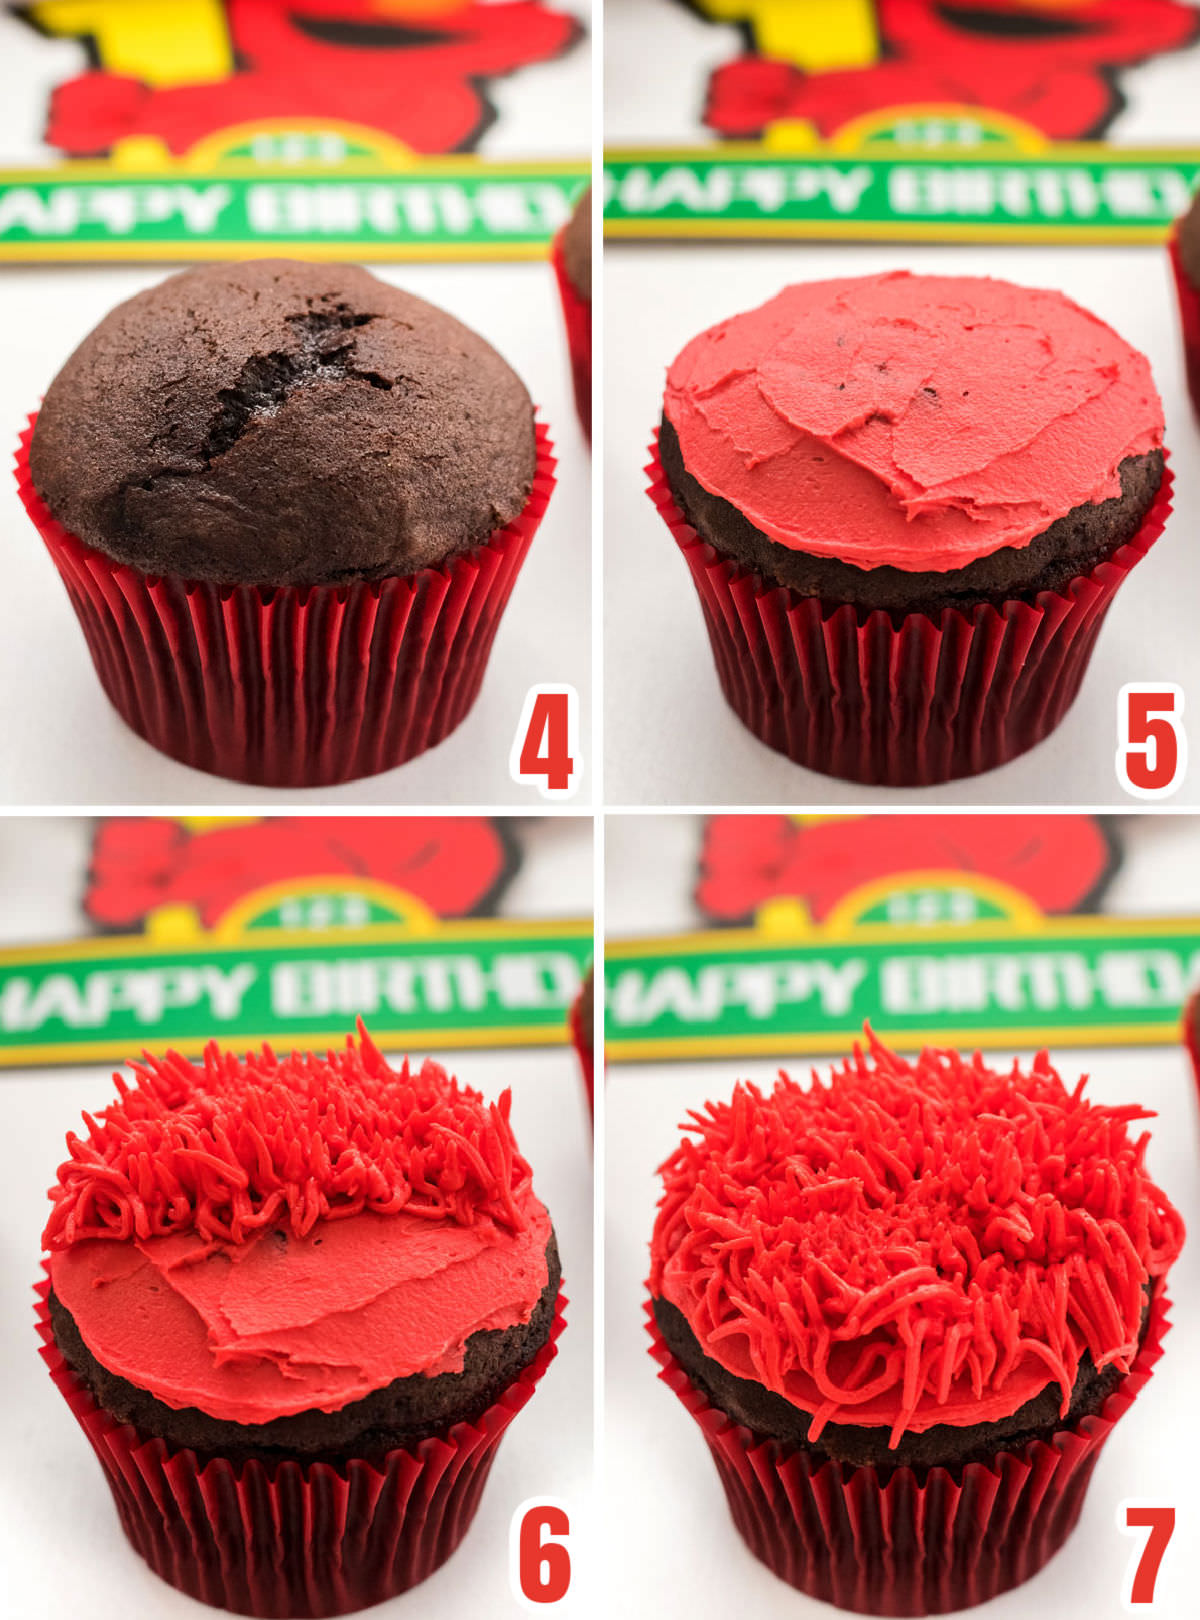 Collage image showing how to frost the cake with Red Buttercream Frosting with a grass decorating tip.